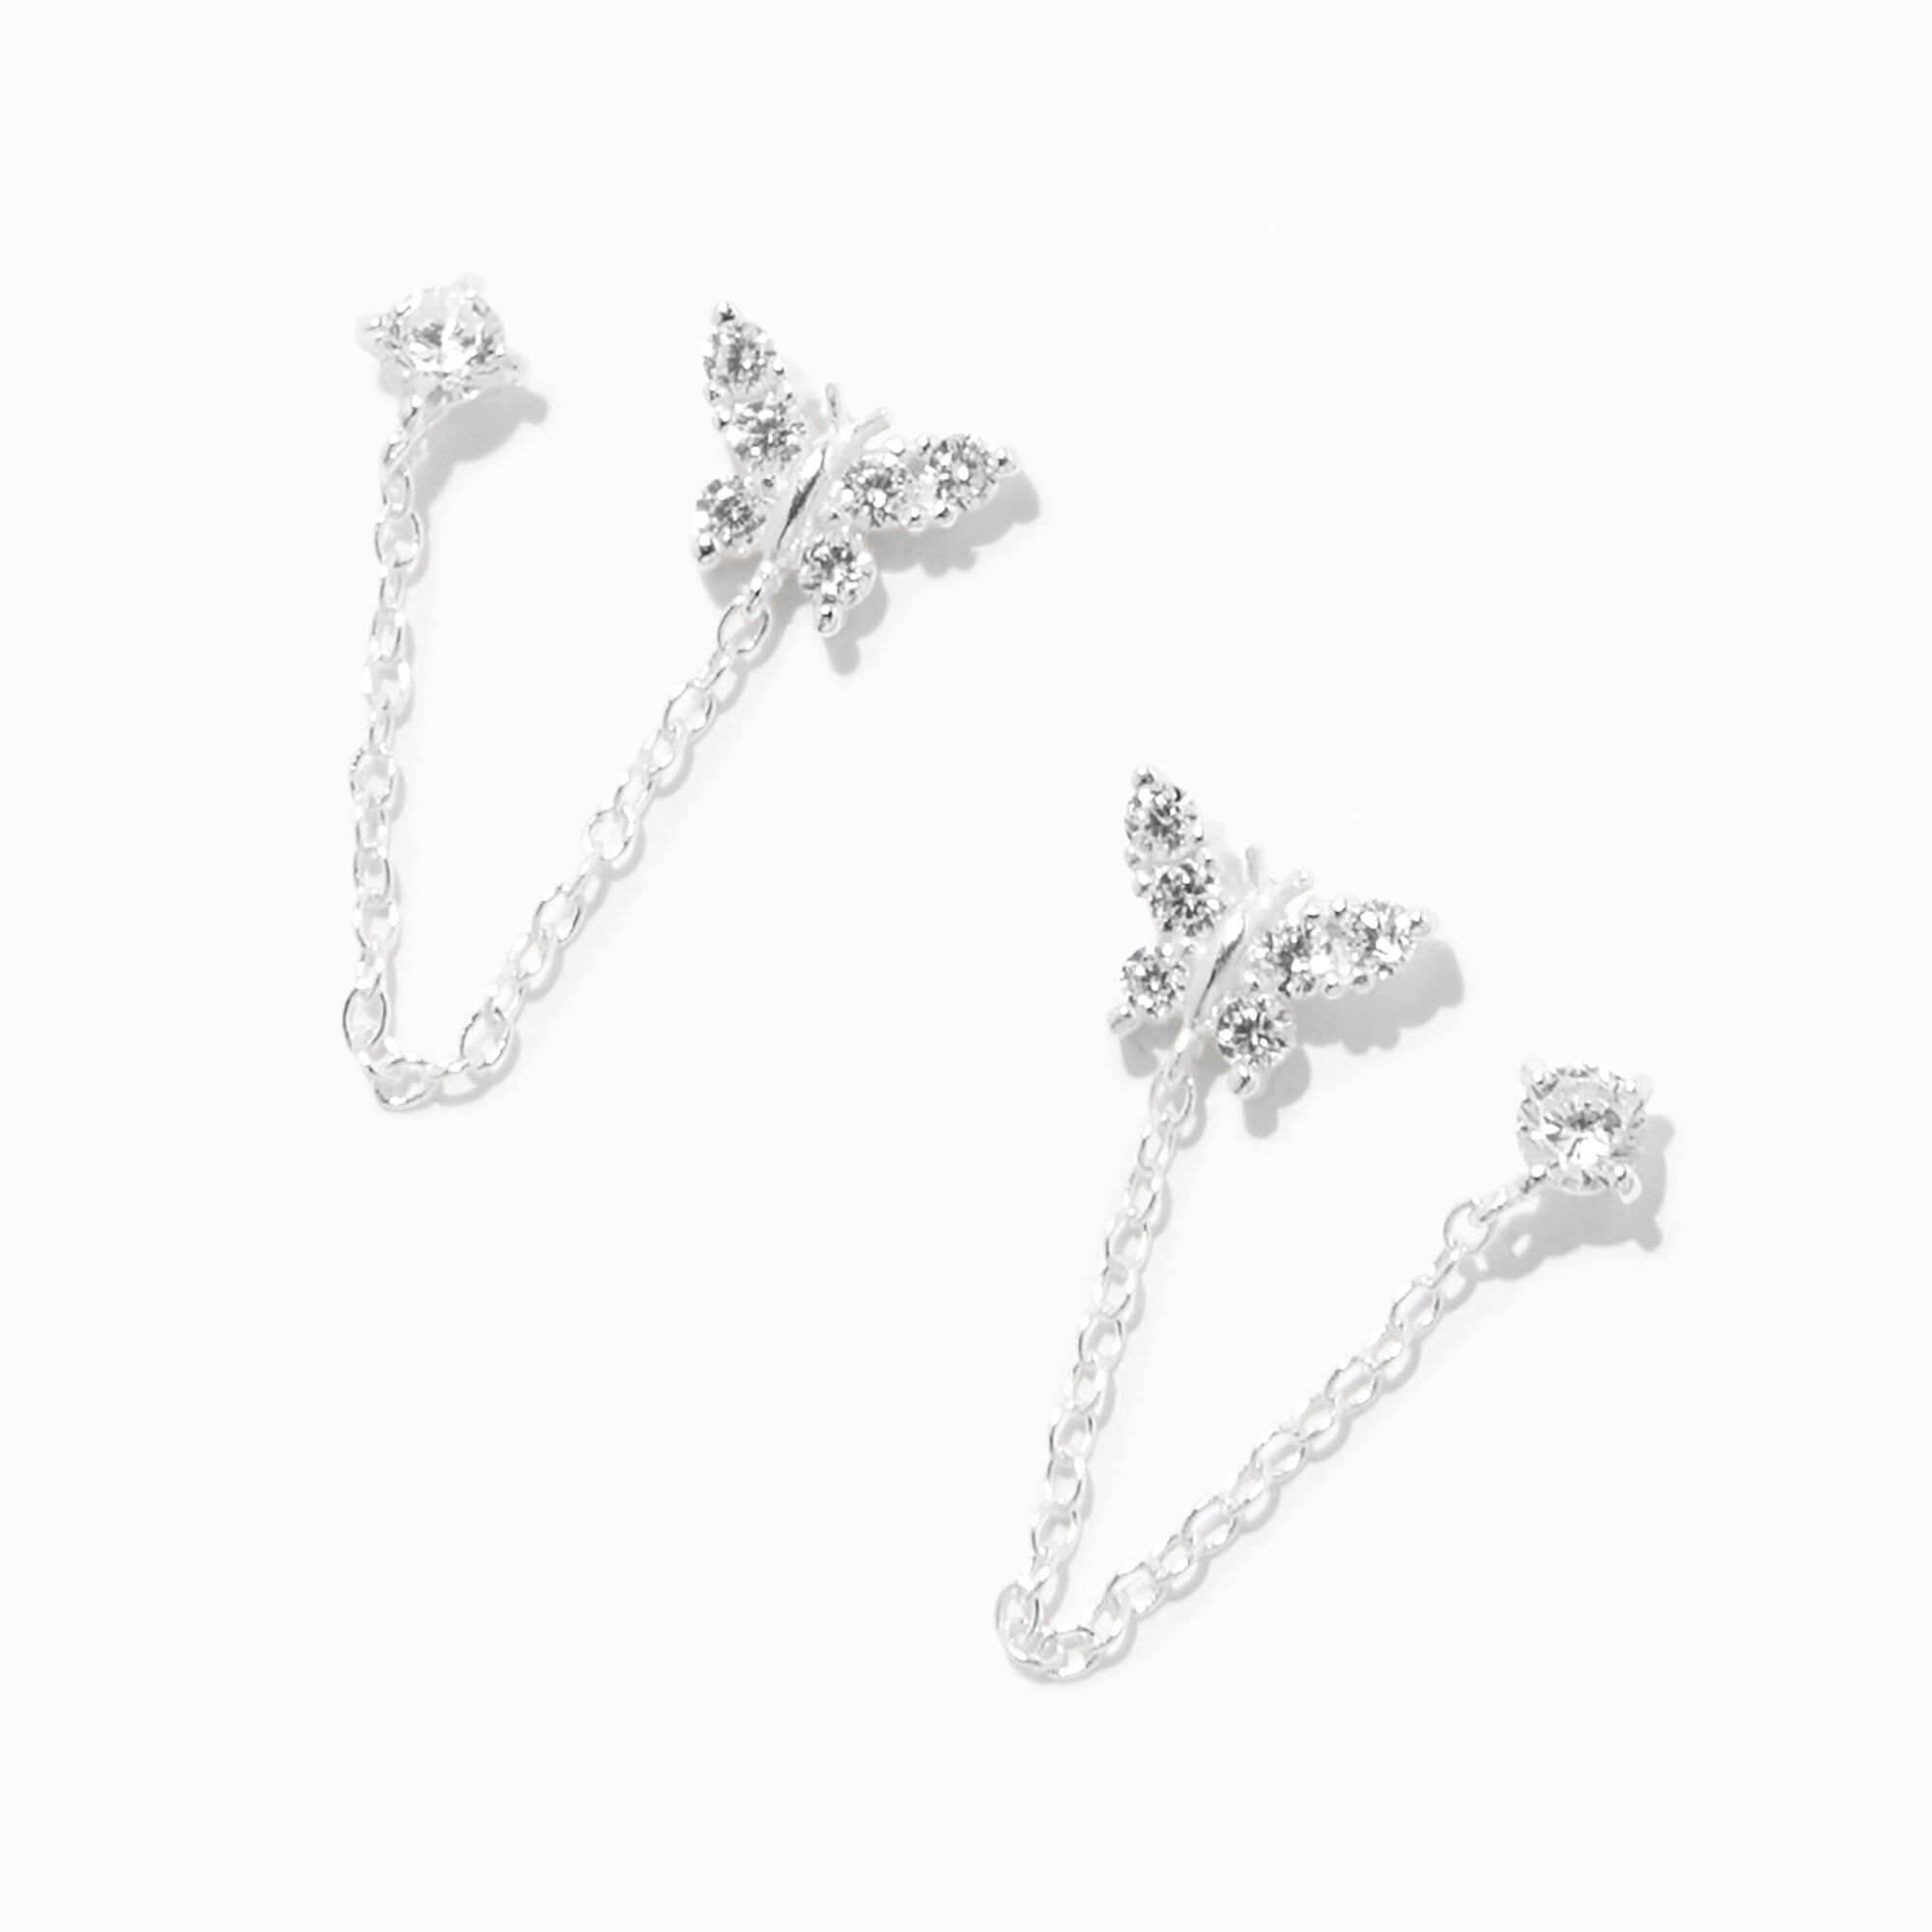 View Claires Butterfly Ear Connector Earrings Silver information